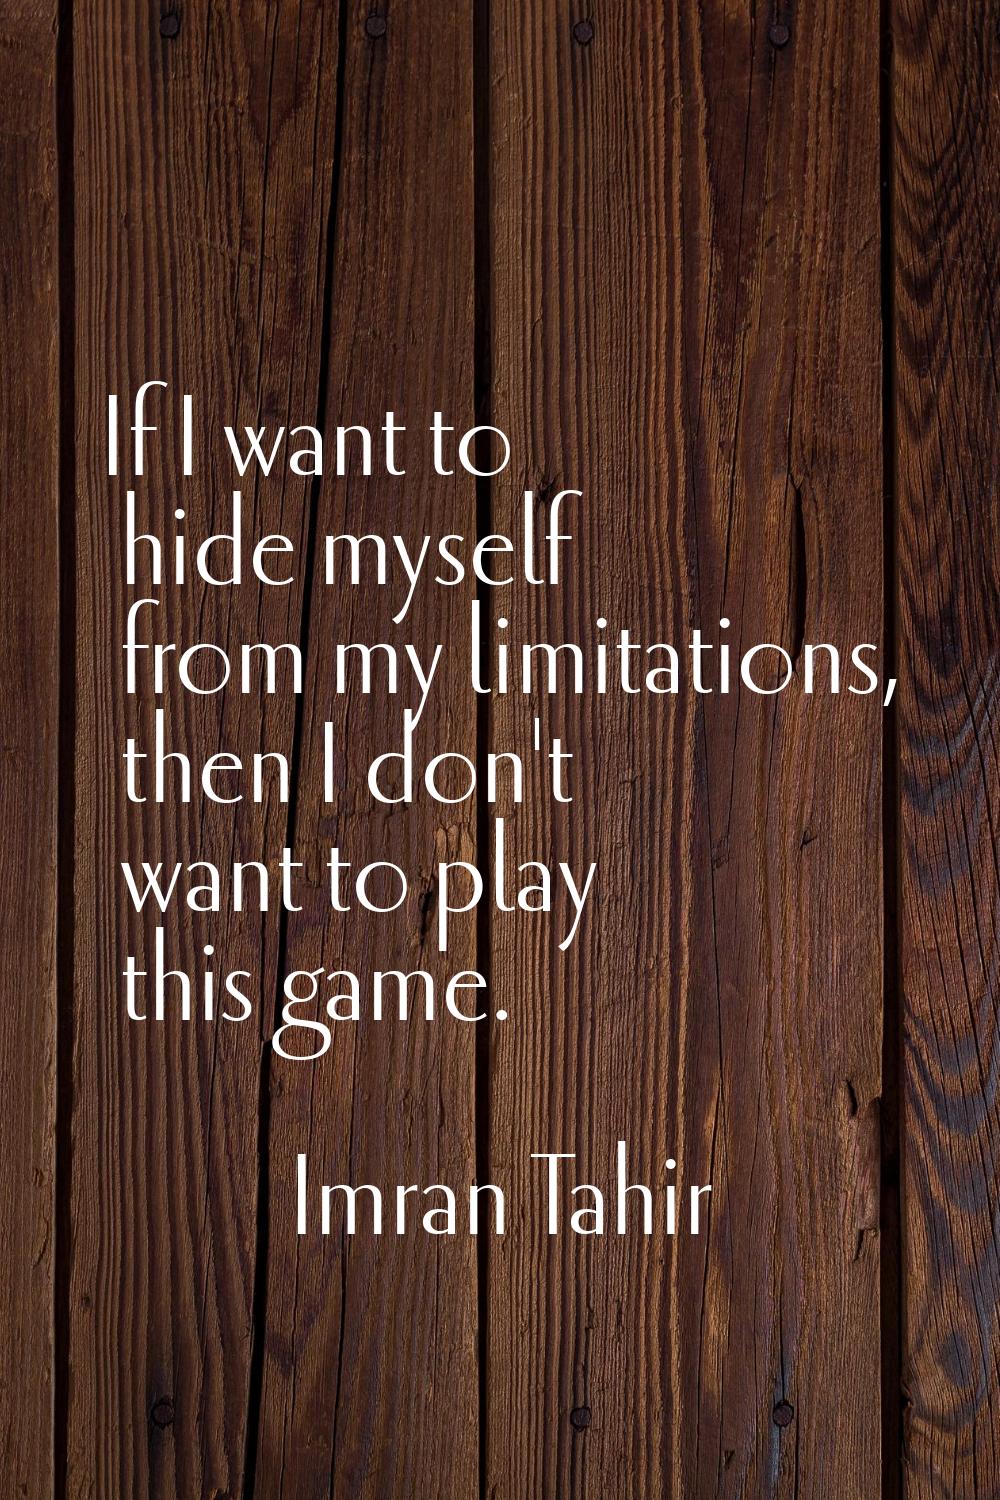 If I want to hide myself from my limitations, then I don't want to play this game.